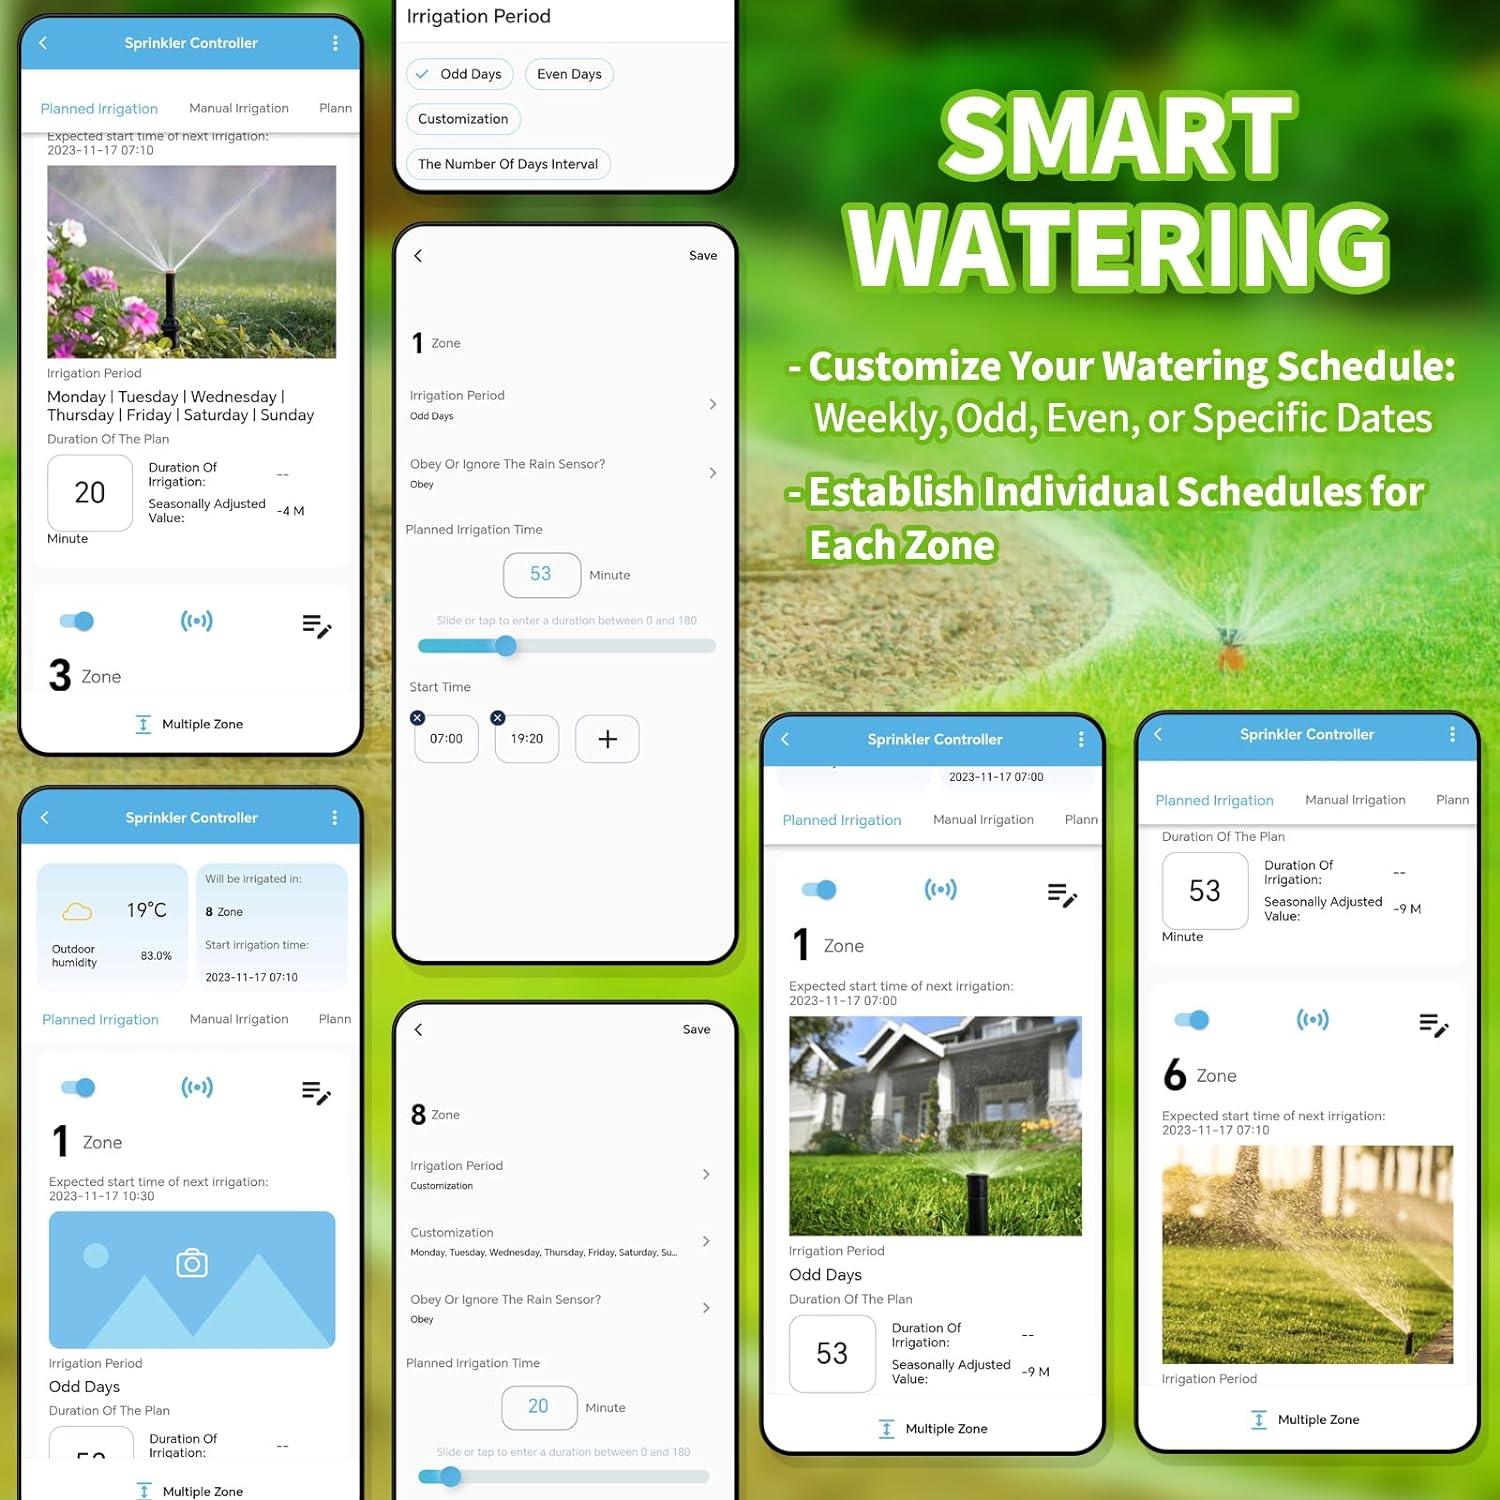 8 Zones WiFi Smart Sprinkler Controller, Briidea Automatic Irrigation Controllers with Customized Watering Schedule & Seasonal Adjustment, Save Water and Keep Your Plants Thrive